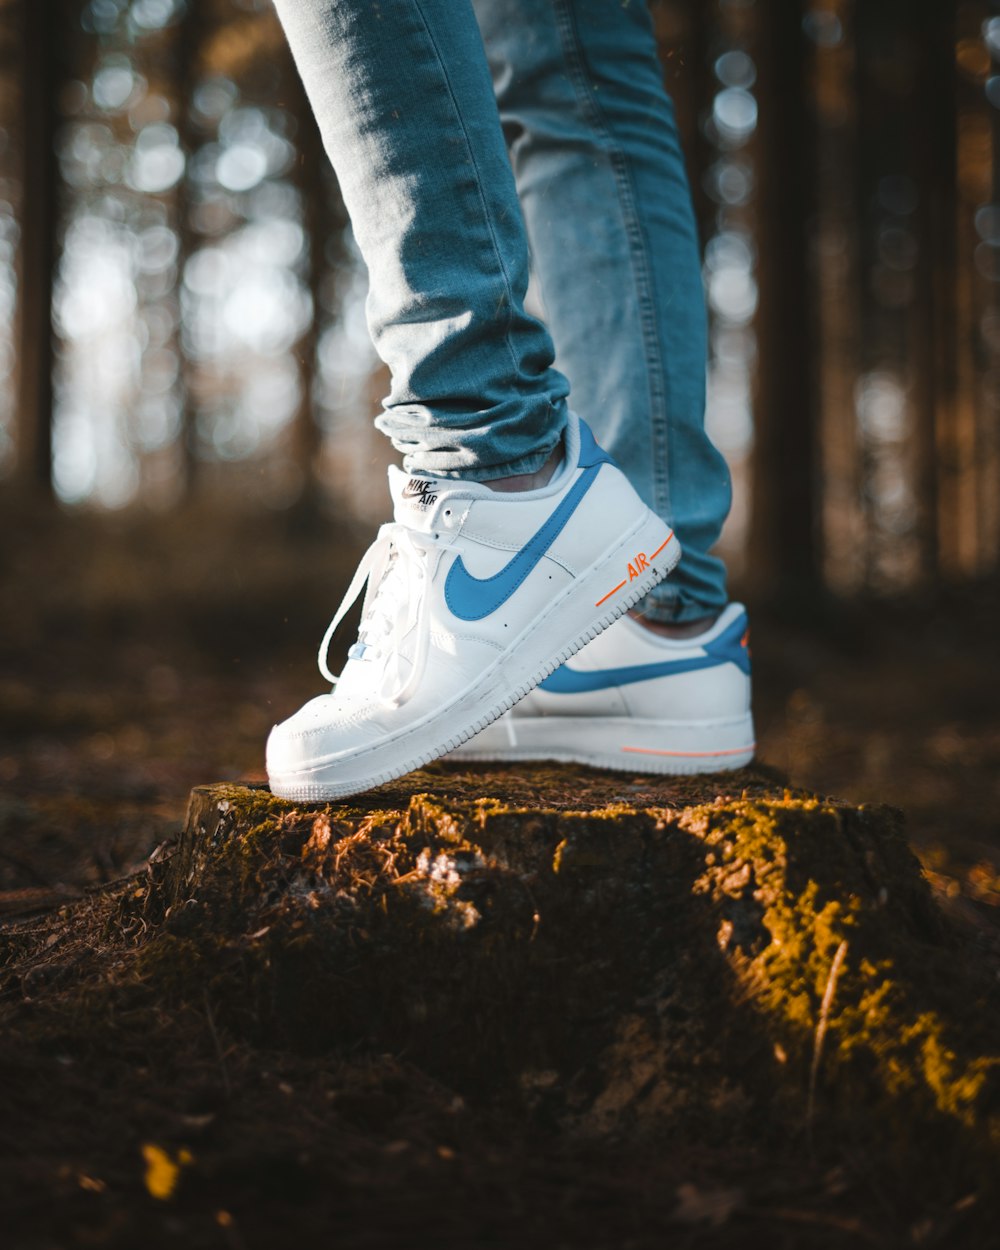 Person wearing blue denim jeans and white nike air max shoes standing on  tree stomp photo – Free Autumn Image on Unsplash